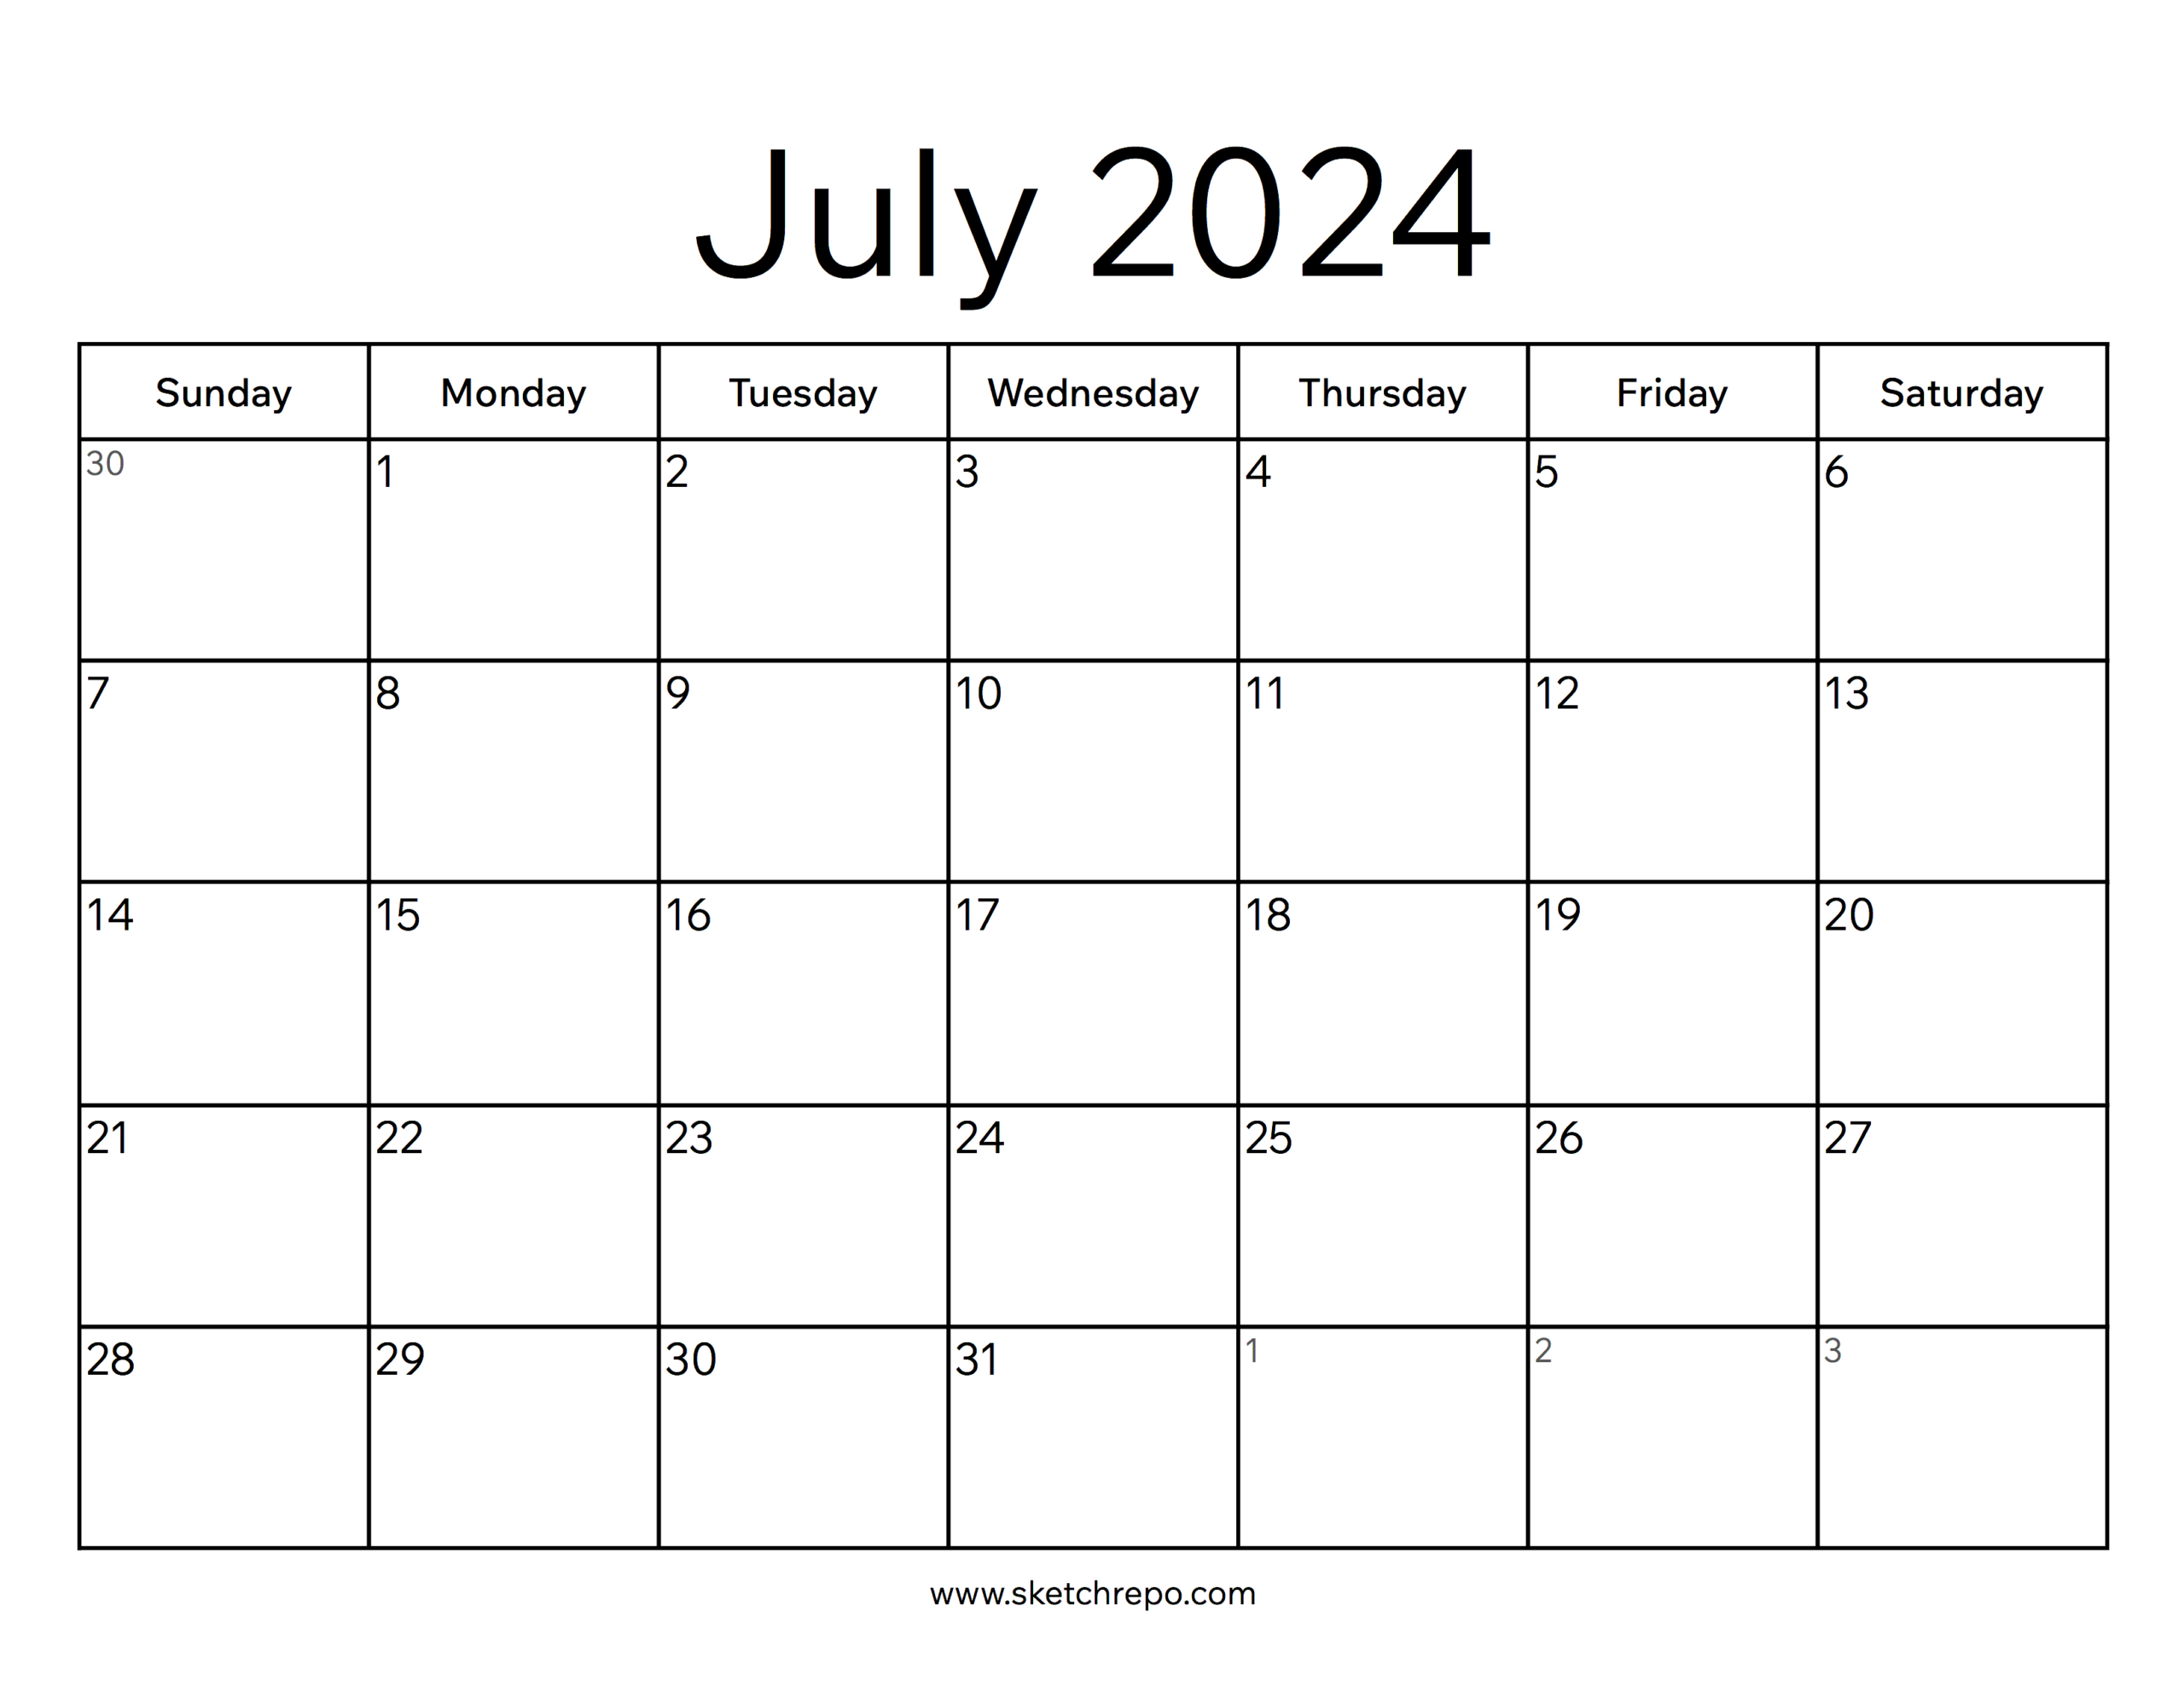 July 2024 Calendar – Sketch Repo inside Calendar For July This Year 2024